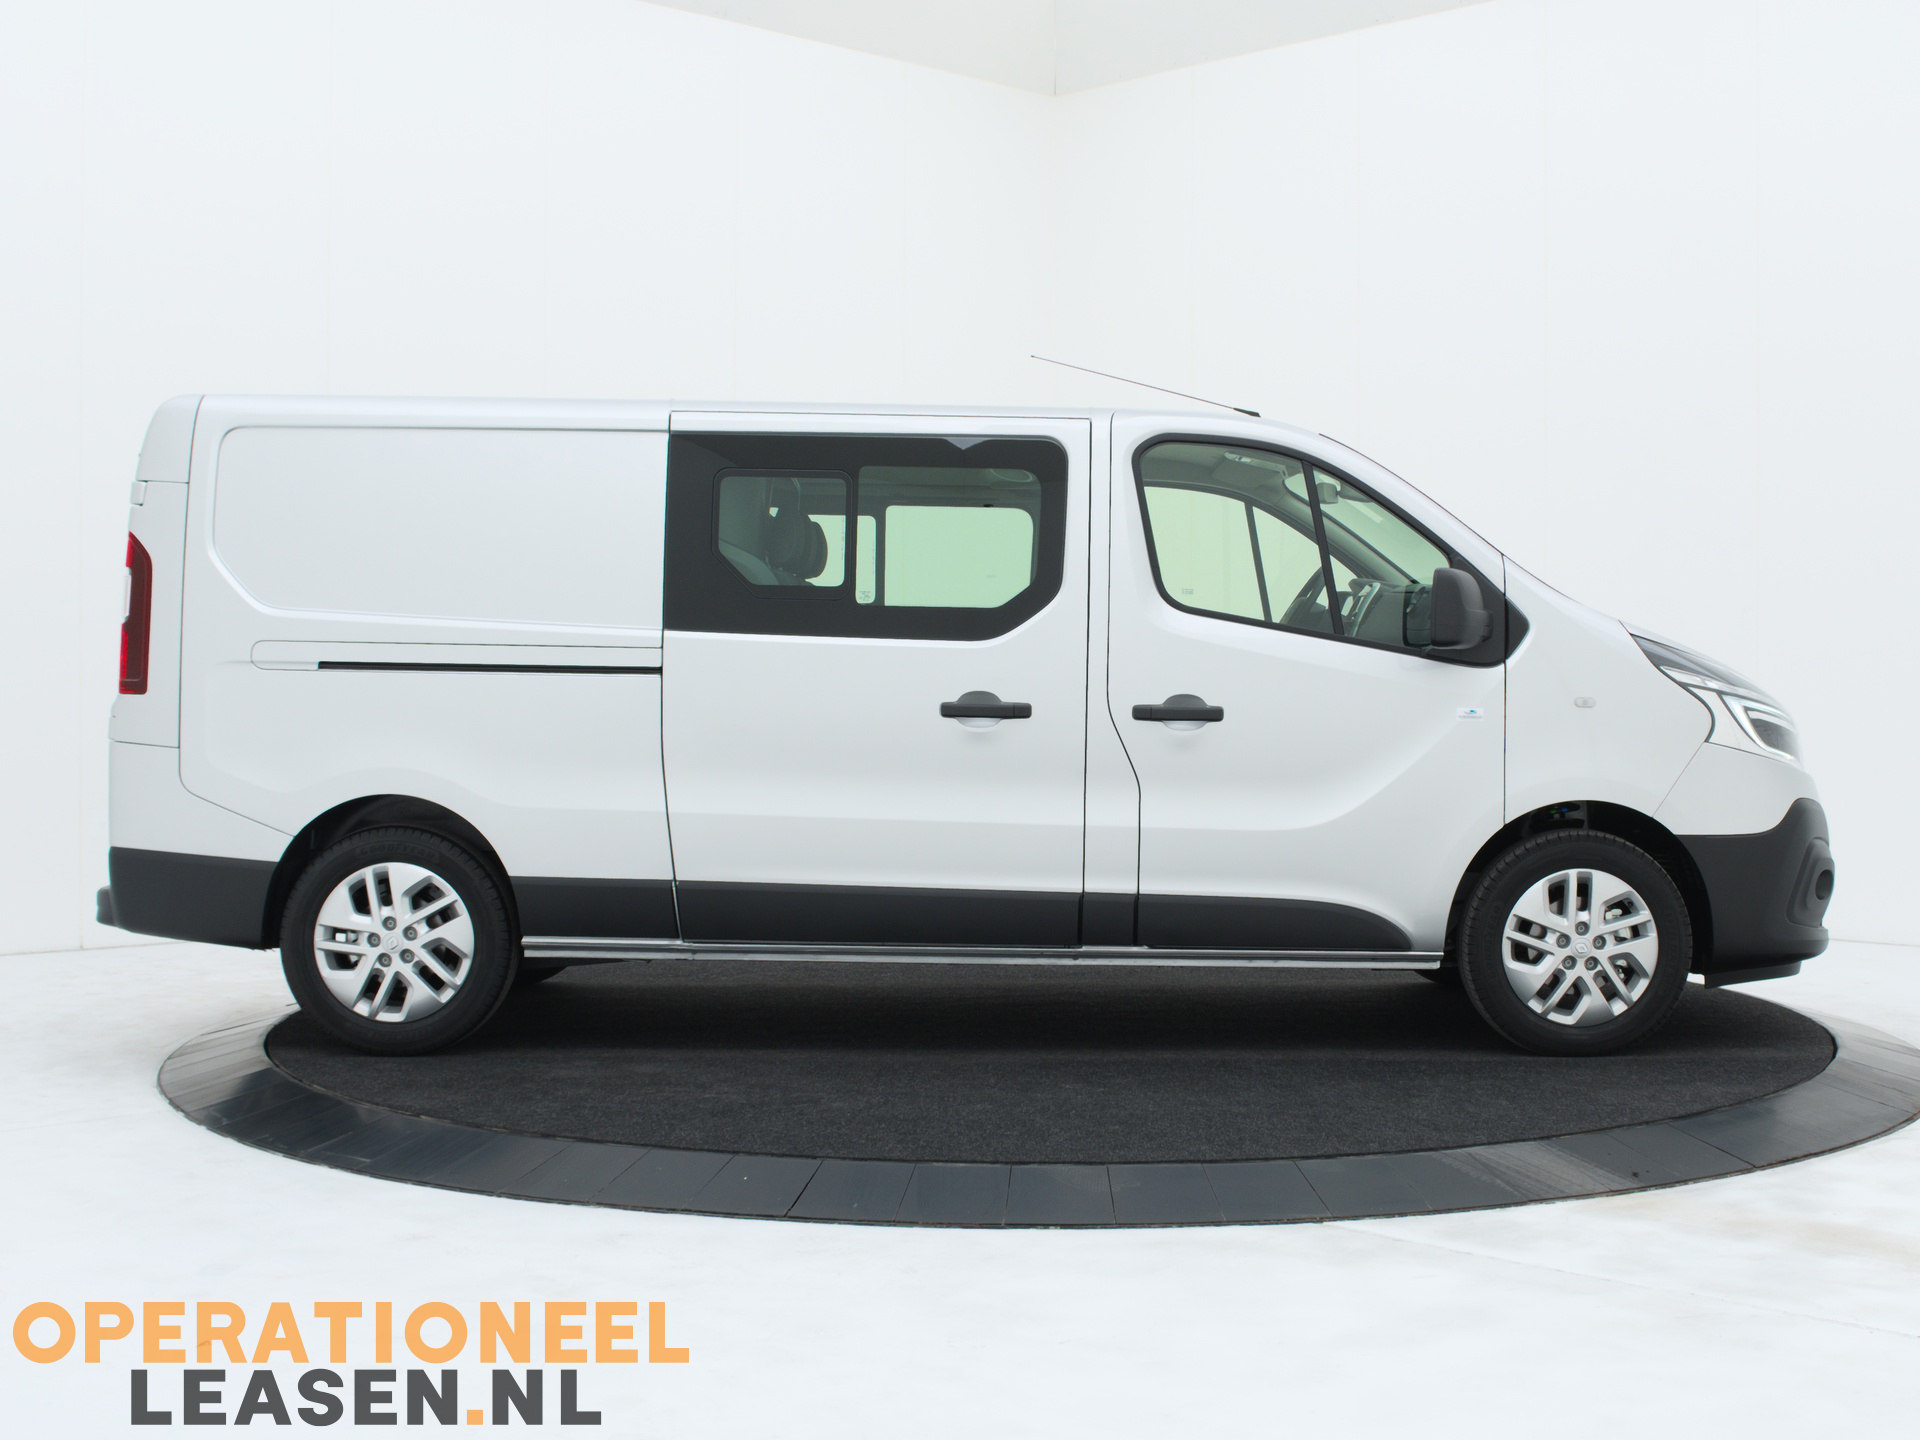 Operational lease Renault master traffic-13